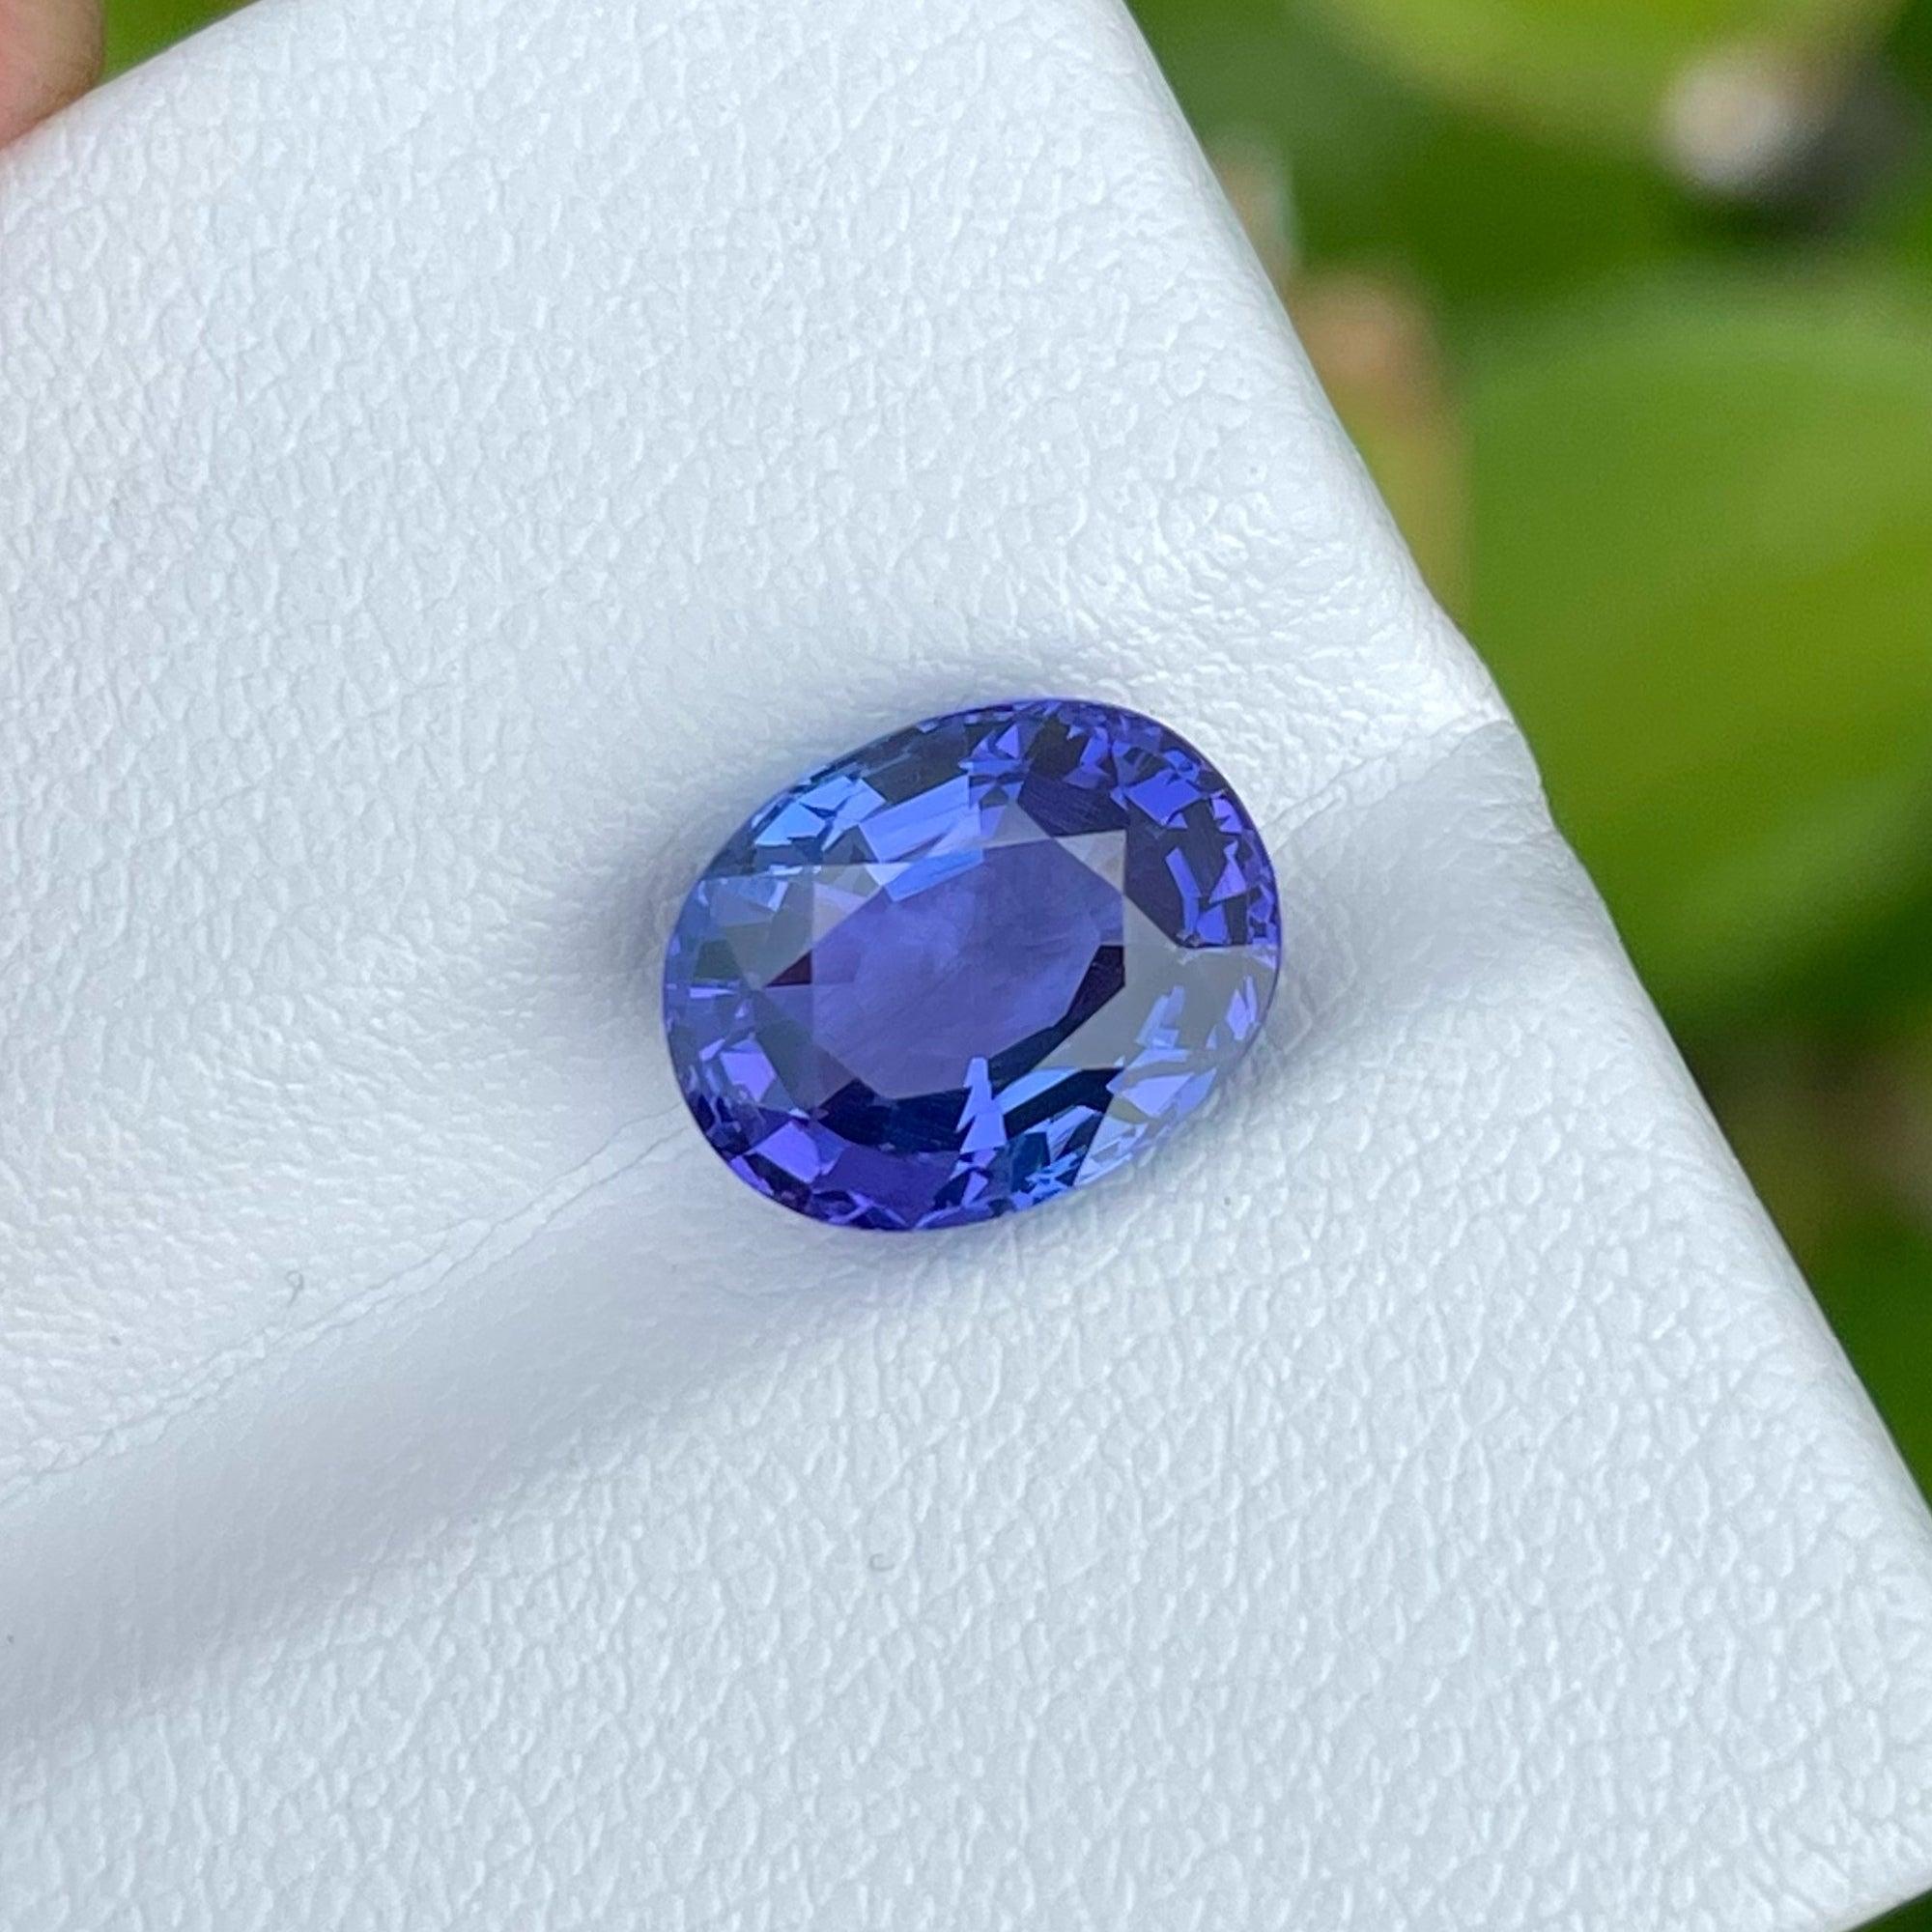 Exquisite 3A Quality Blue Tanzanite Gemstone of 4.10 Carat from Tanzania has a wonderful cut in a Oval shape, incredible Blue color. Great brilliance. This gem is totally Loupe-Clean Clarity.

Product Information:
GEMSTONE TYPE:	Exquisite 3A Quality